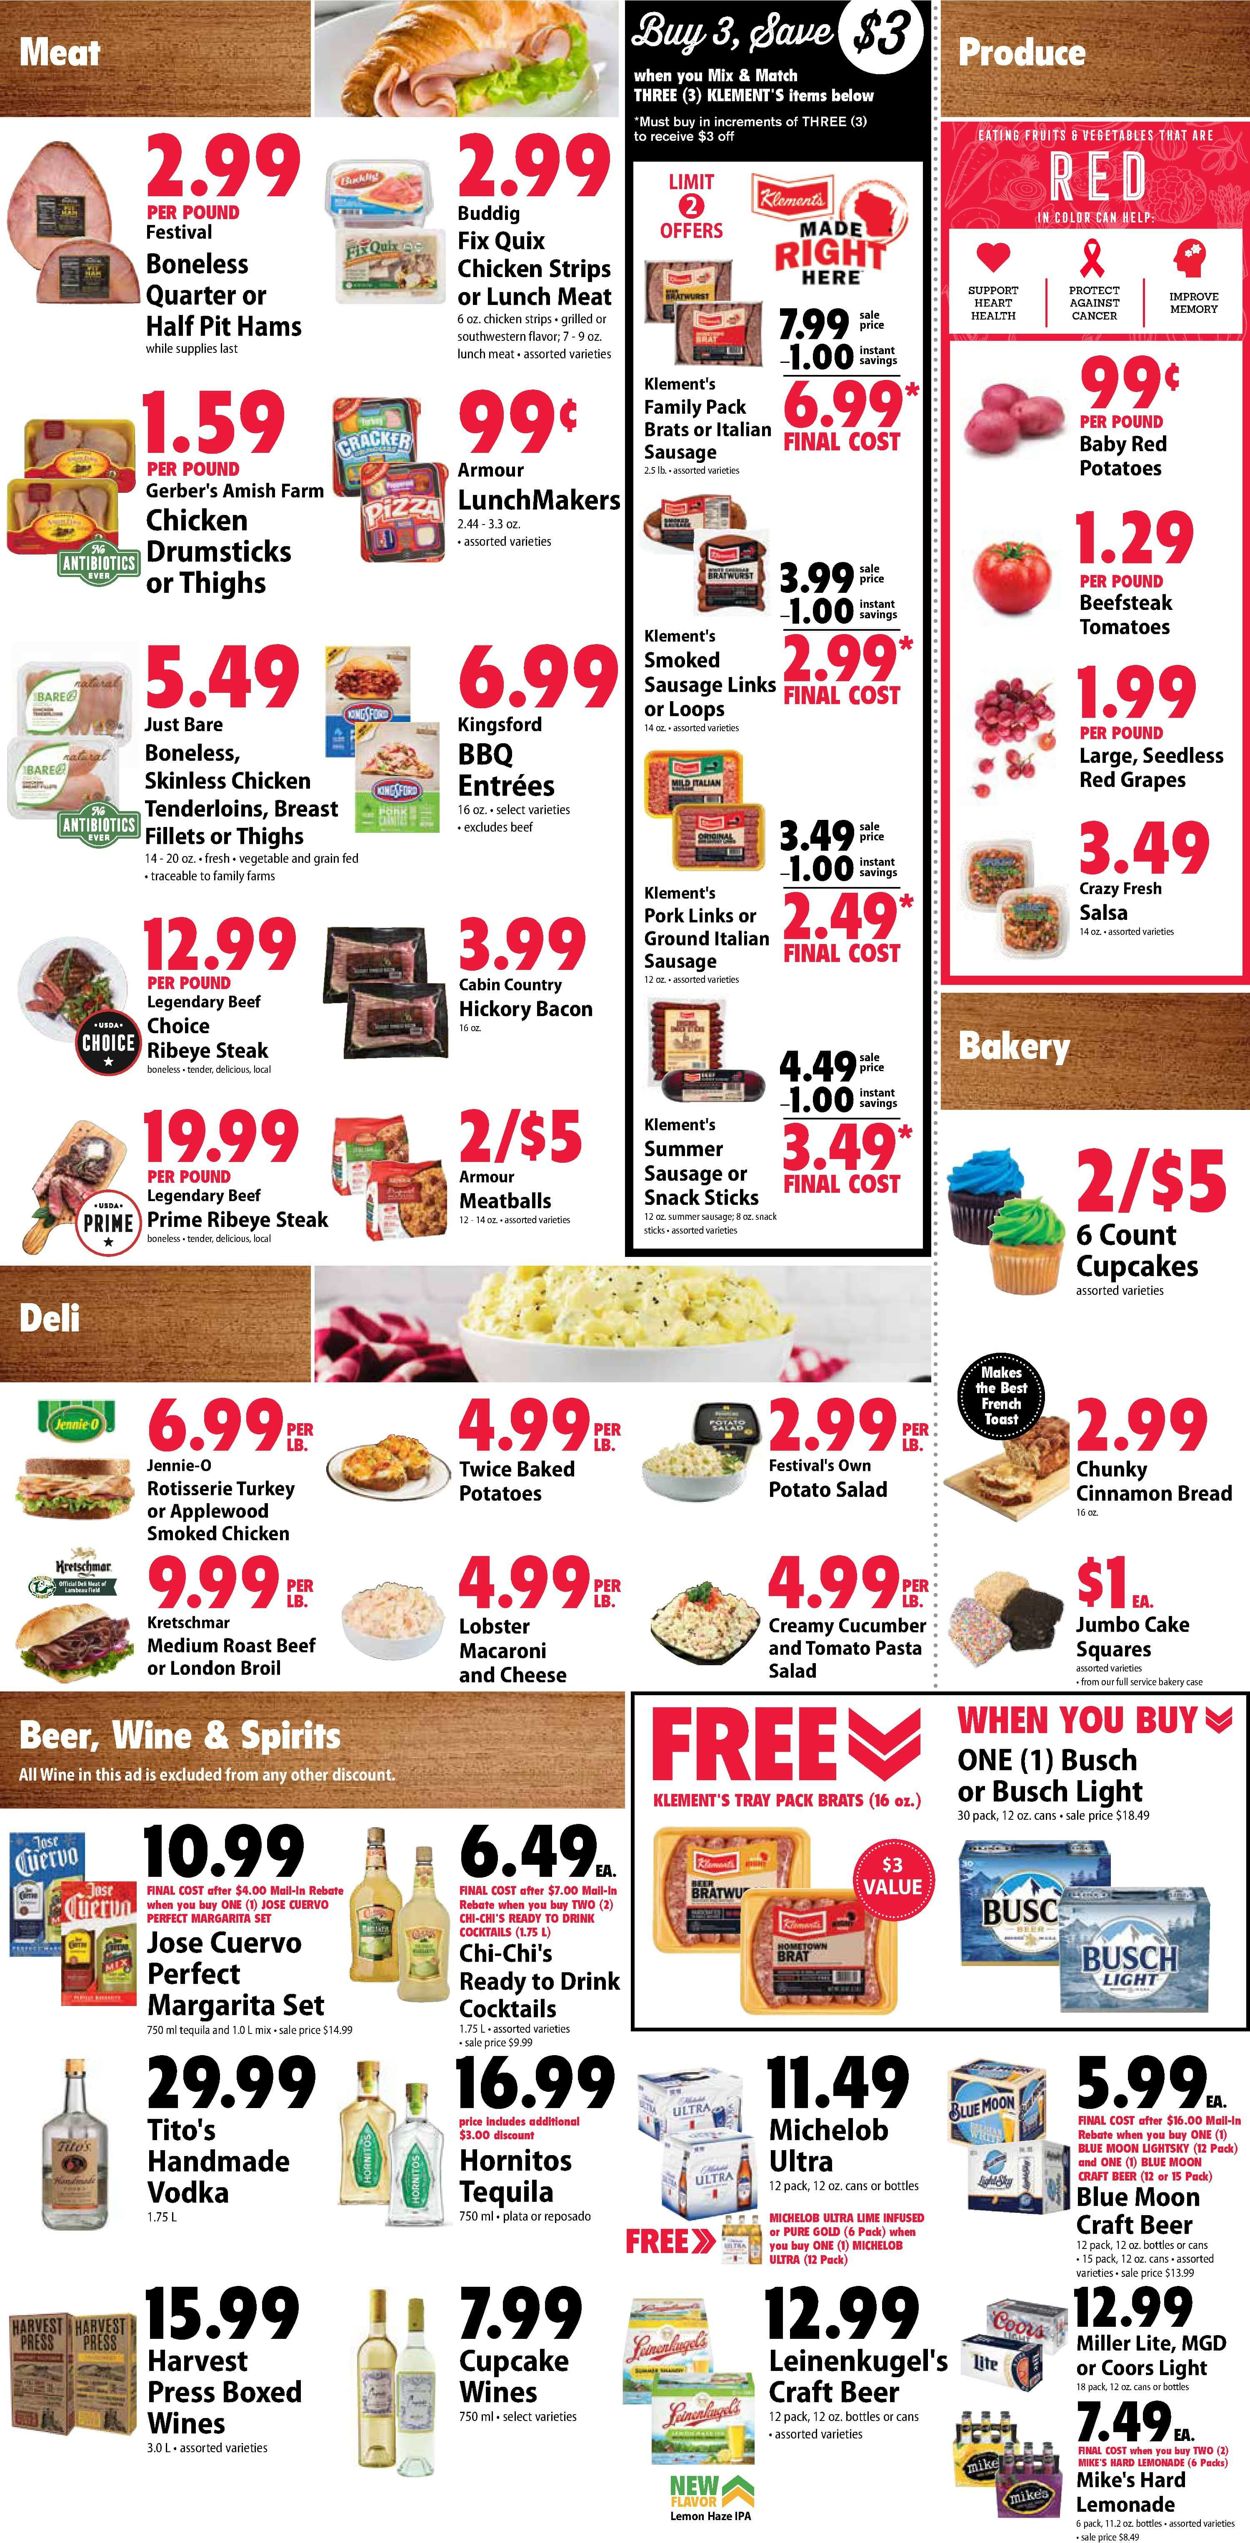 Festival Foods Current weekly ad 04/28 - 05/04/2021 [2] - frequent-ads.com